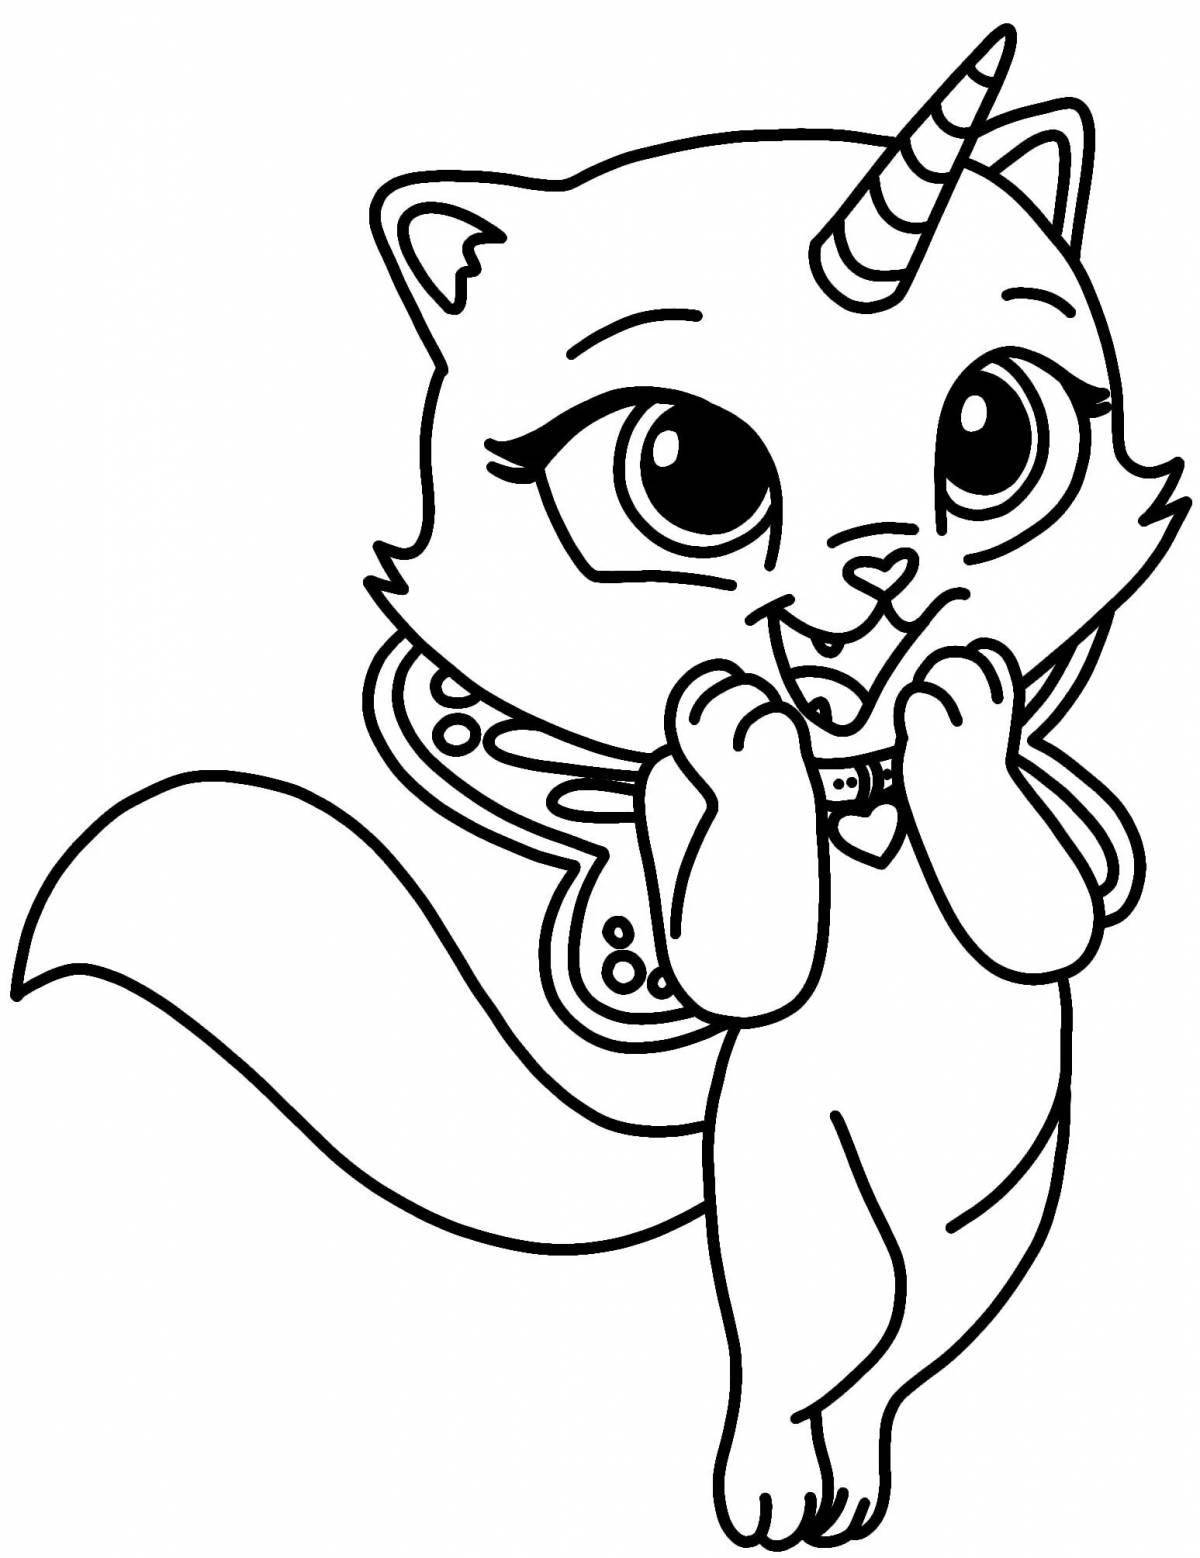 Coloring page happy rainbow cat